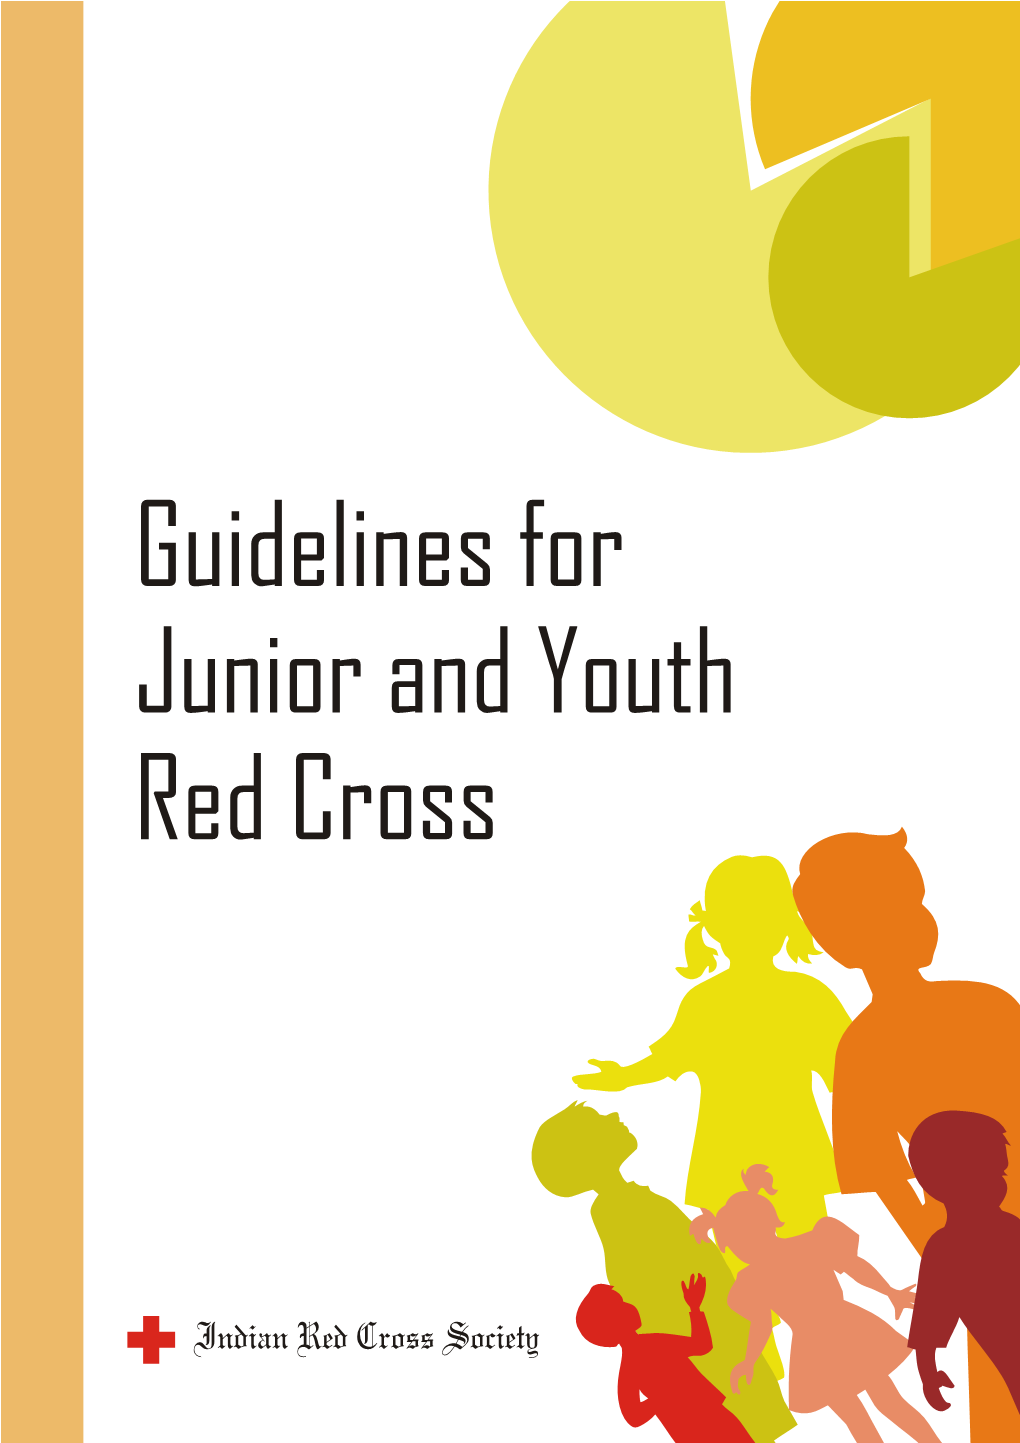 Guidelines for Junior and Youth Red Cross Guidelines for Junior and Youth Red Cross © 2012 Indian Red Cross Society